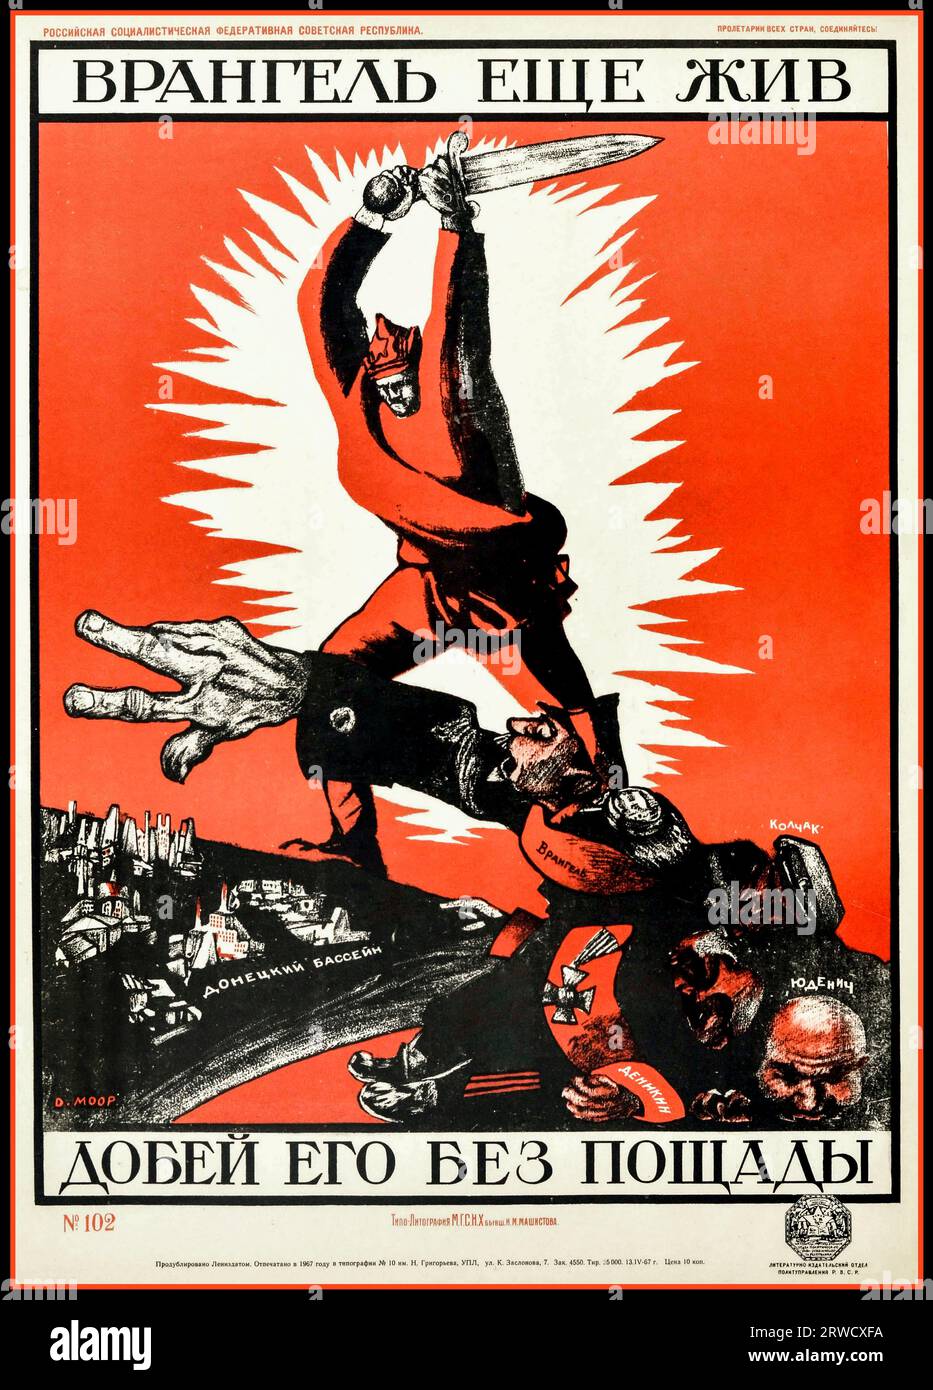 Russian Soviet Government propaganda poster captioned 'Wrangel is Still Alive, Finish Him Off Without Mercy!' Pyotr Nikolayevich Wrangel (1878-1928) was a Russian officer of Baltic German origin in the Imperial Russian Army. During the later stages of the Russian Civil War, he was commanding general of the anti-Bolshevik White Army in Southern Russia. After his side lost the civil war in 1920, he left Russia. He was known as one of the most prominent exiled White emigres and military dictator of the South Russia (as commander in chief). Poster by D. Moor, the artist name of Dmitry Stakhievich Stock Photo